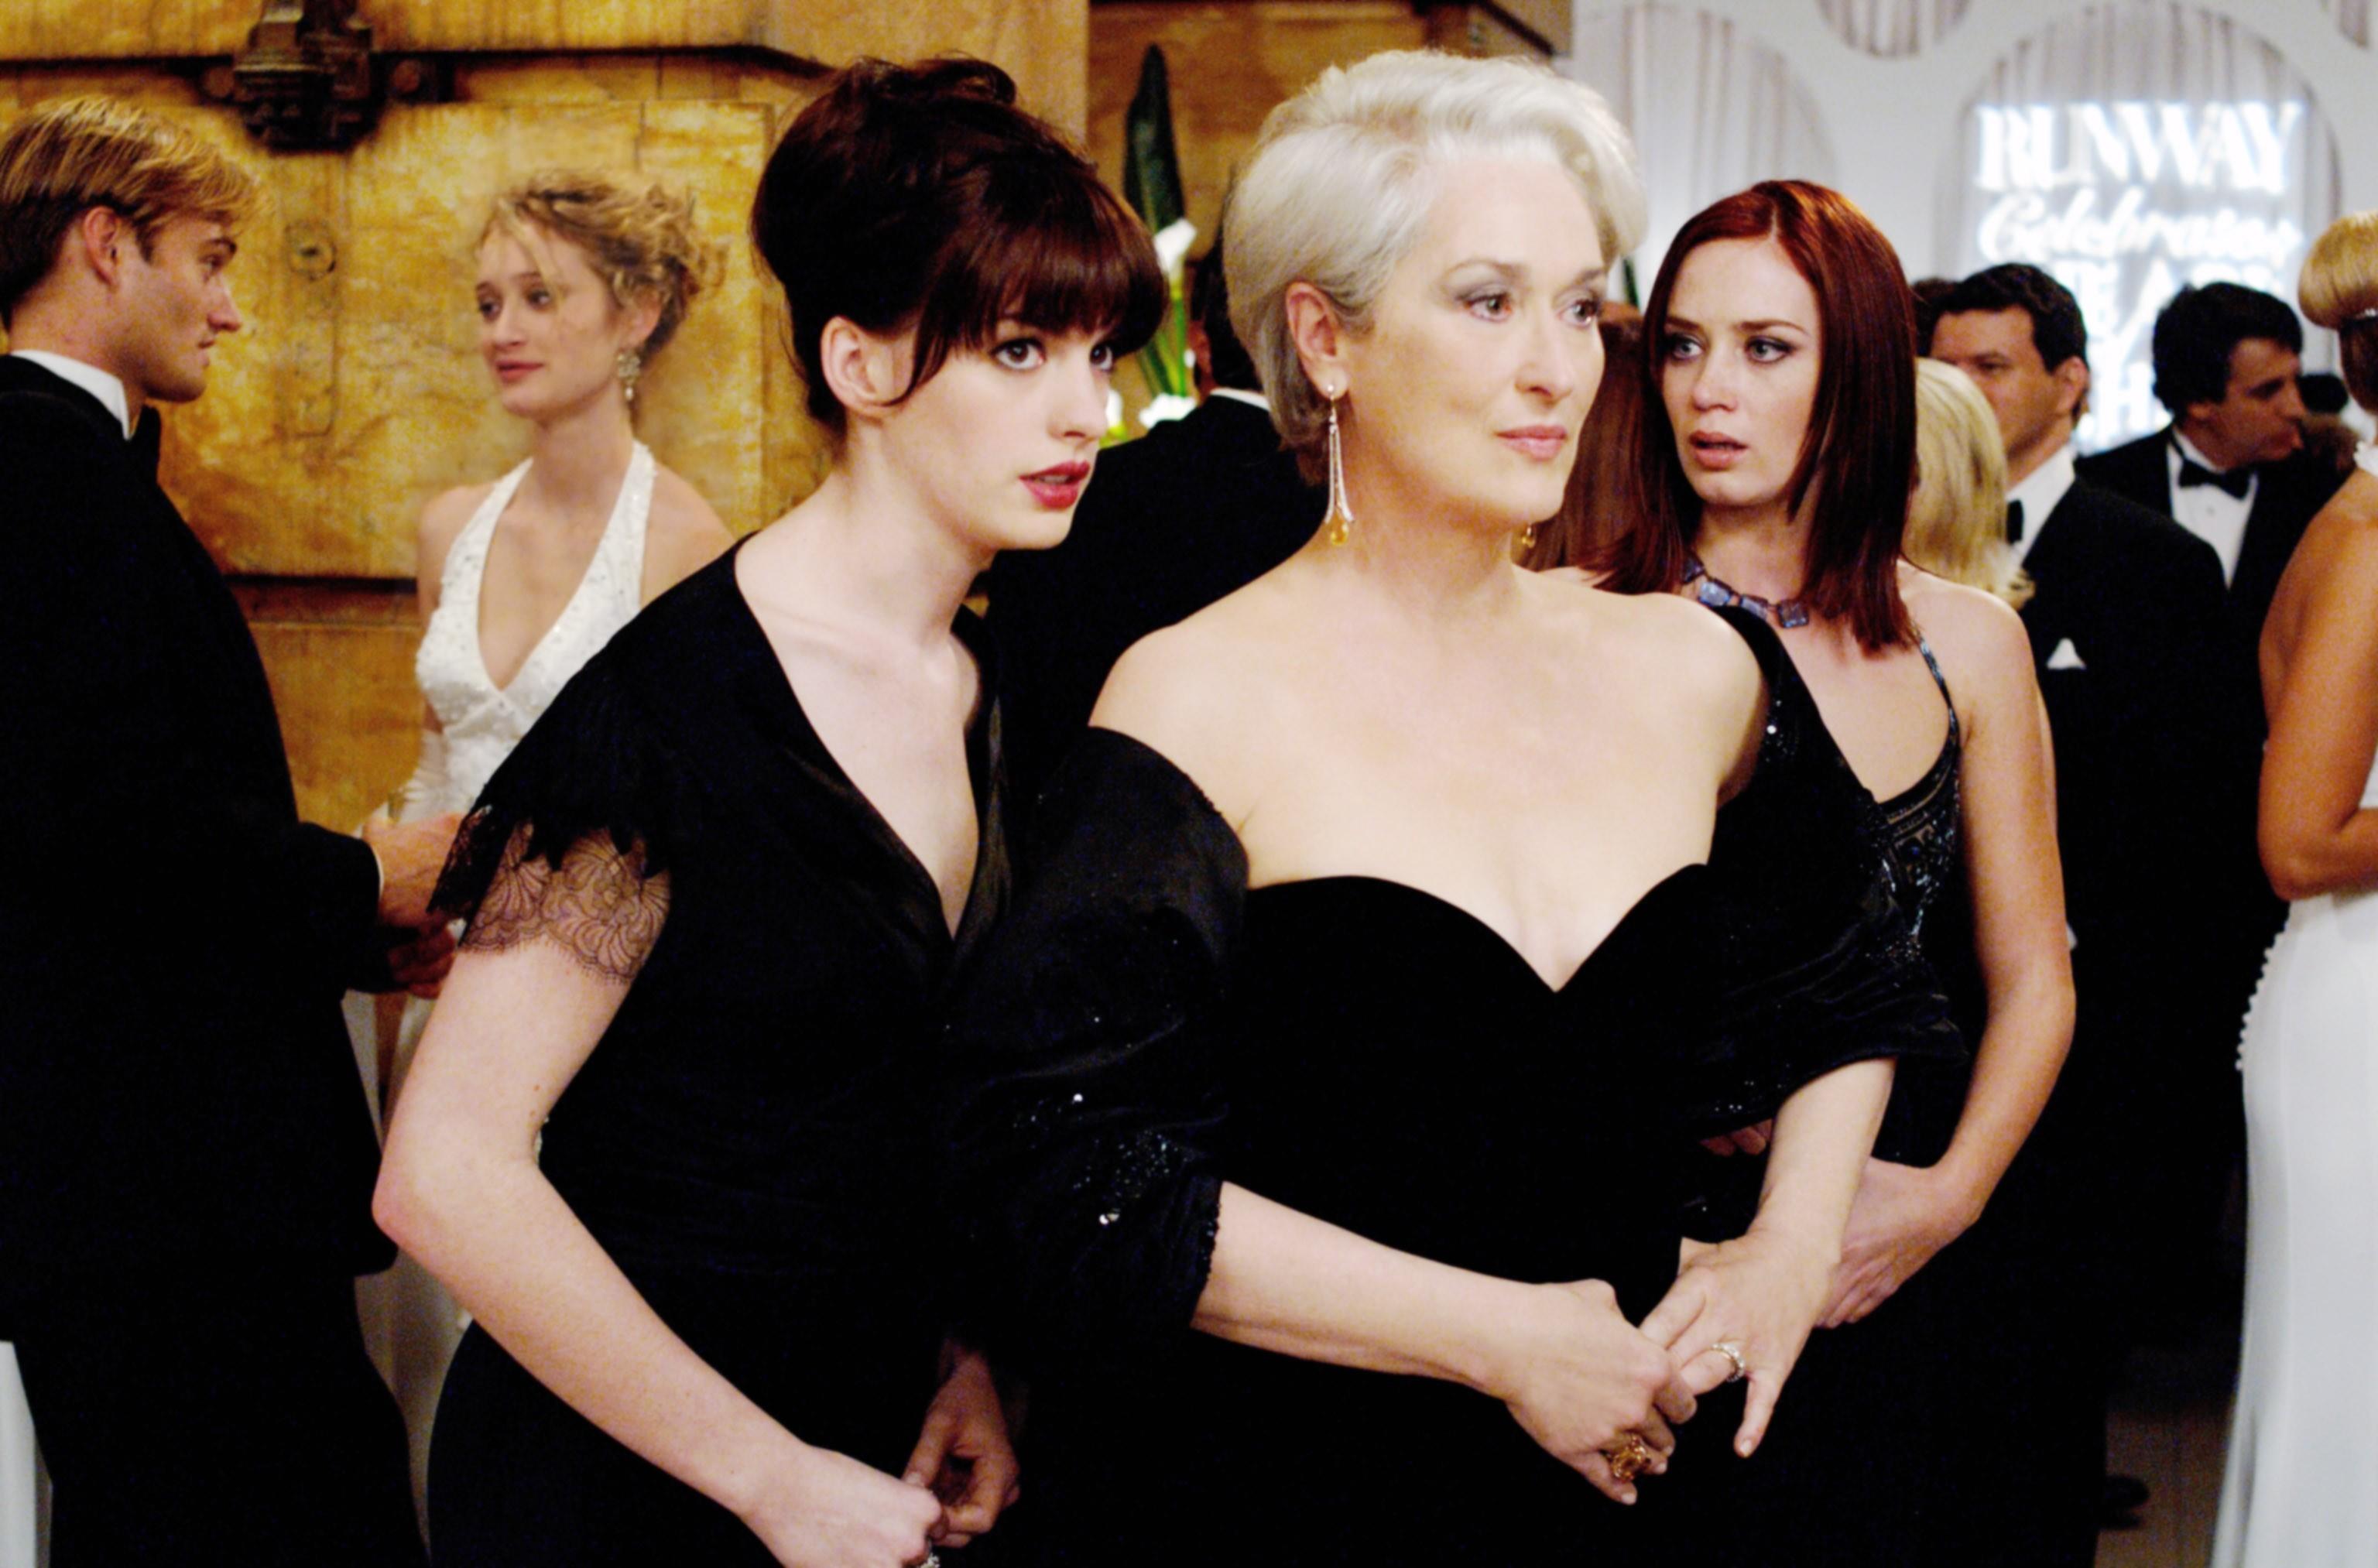 The Devil Wears Prada is on TV tonight and that’s our night sorted